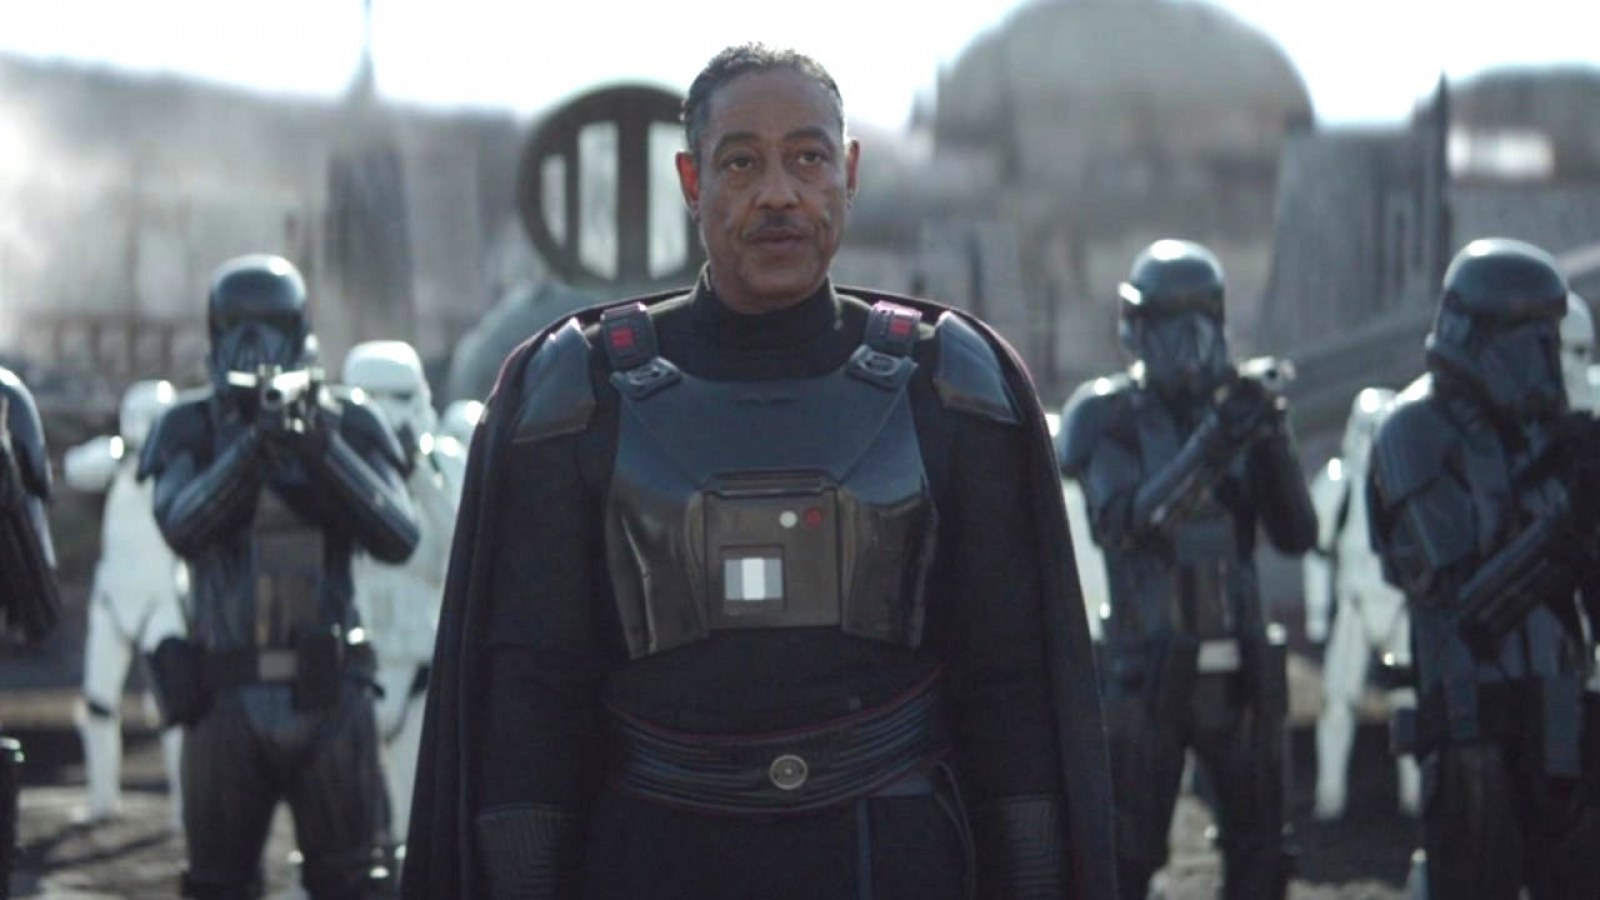 The Mandalorian': Who The Dark Troopers Are and What They Mean for the Show